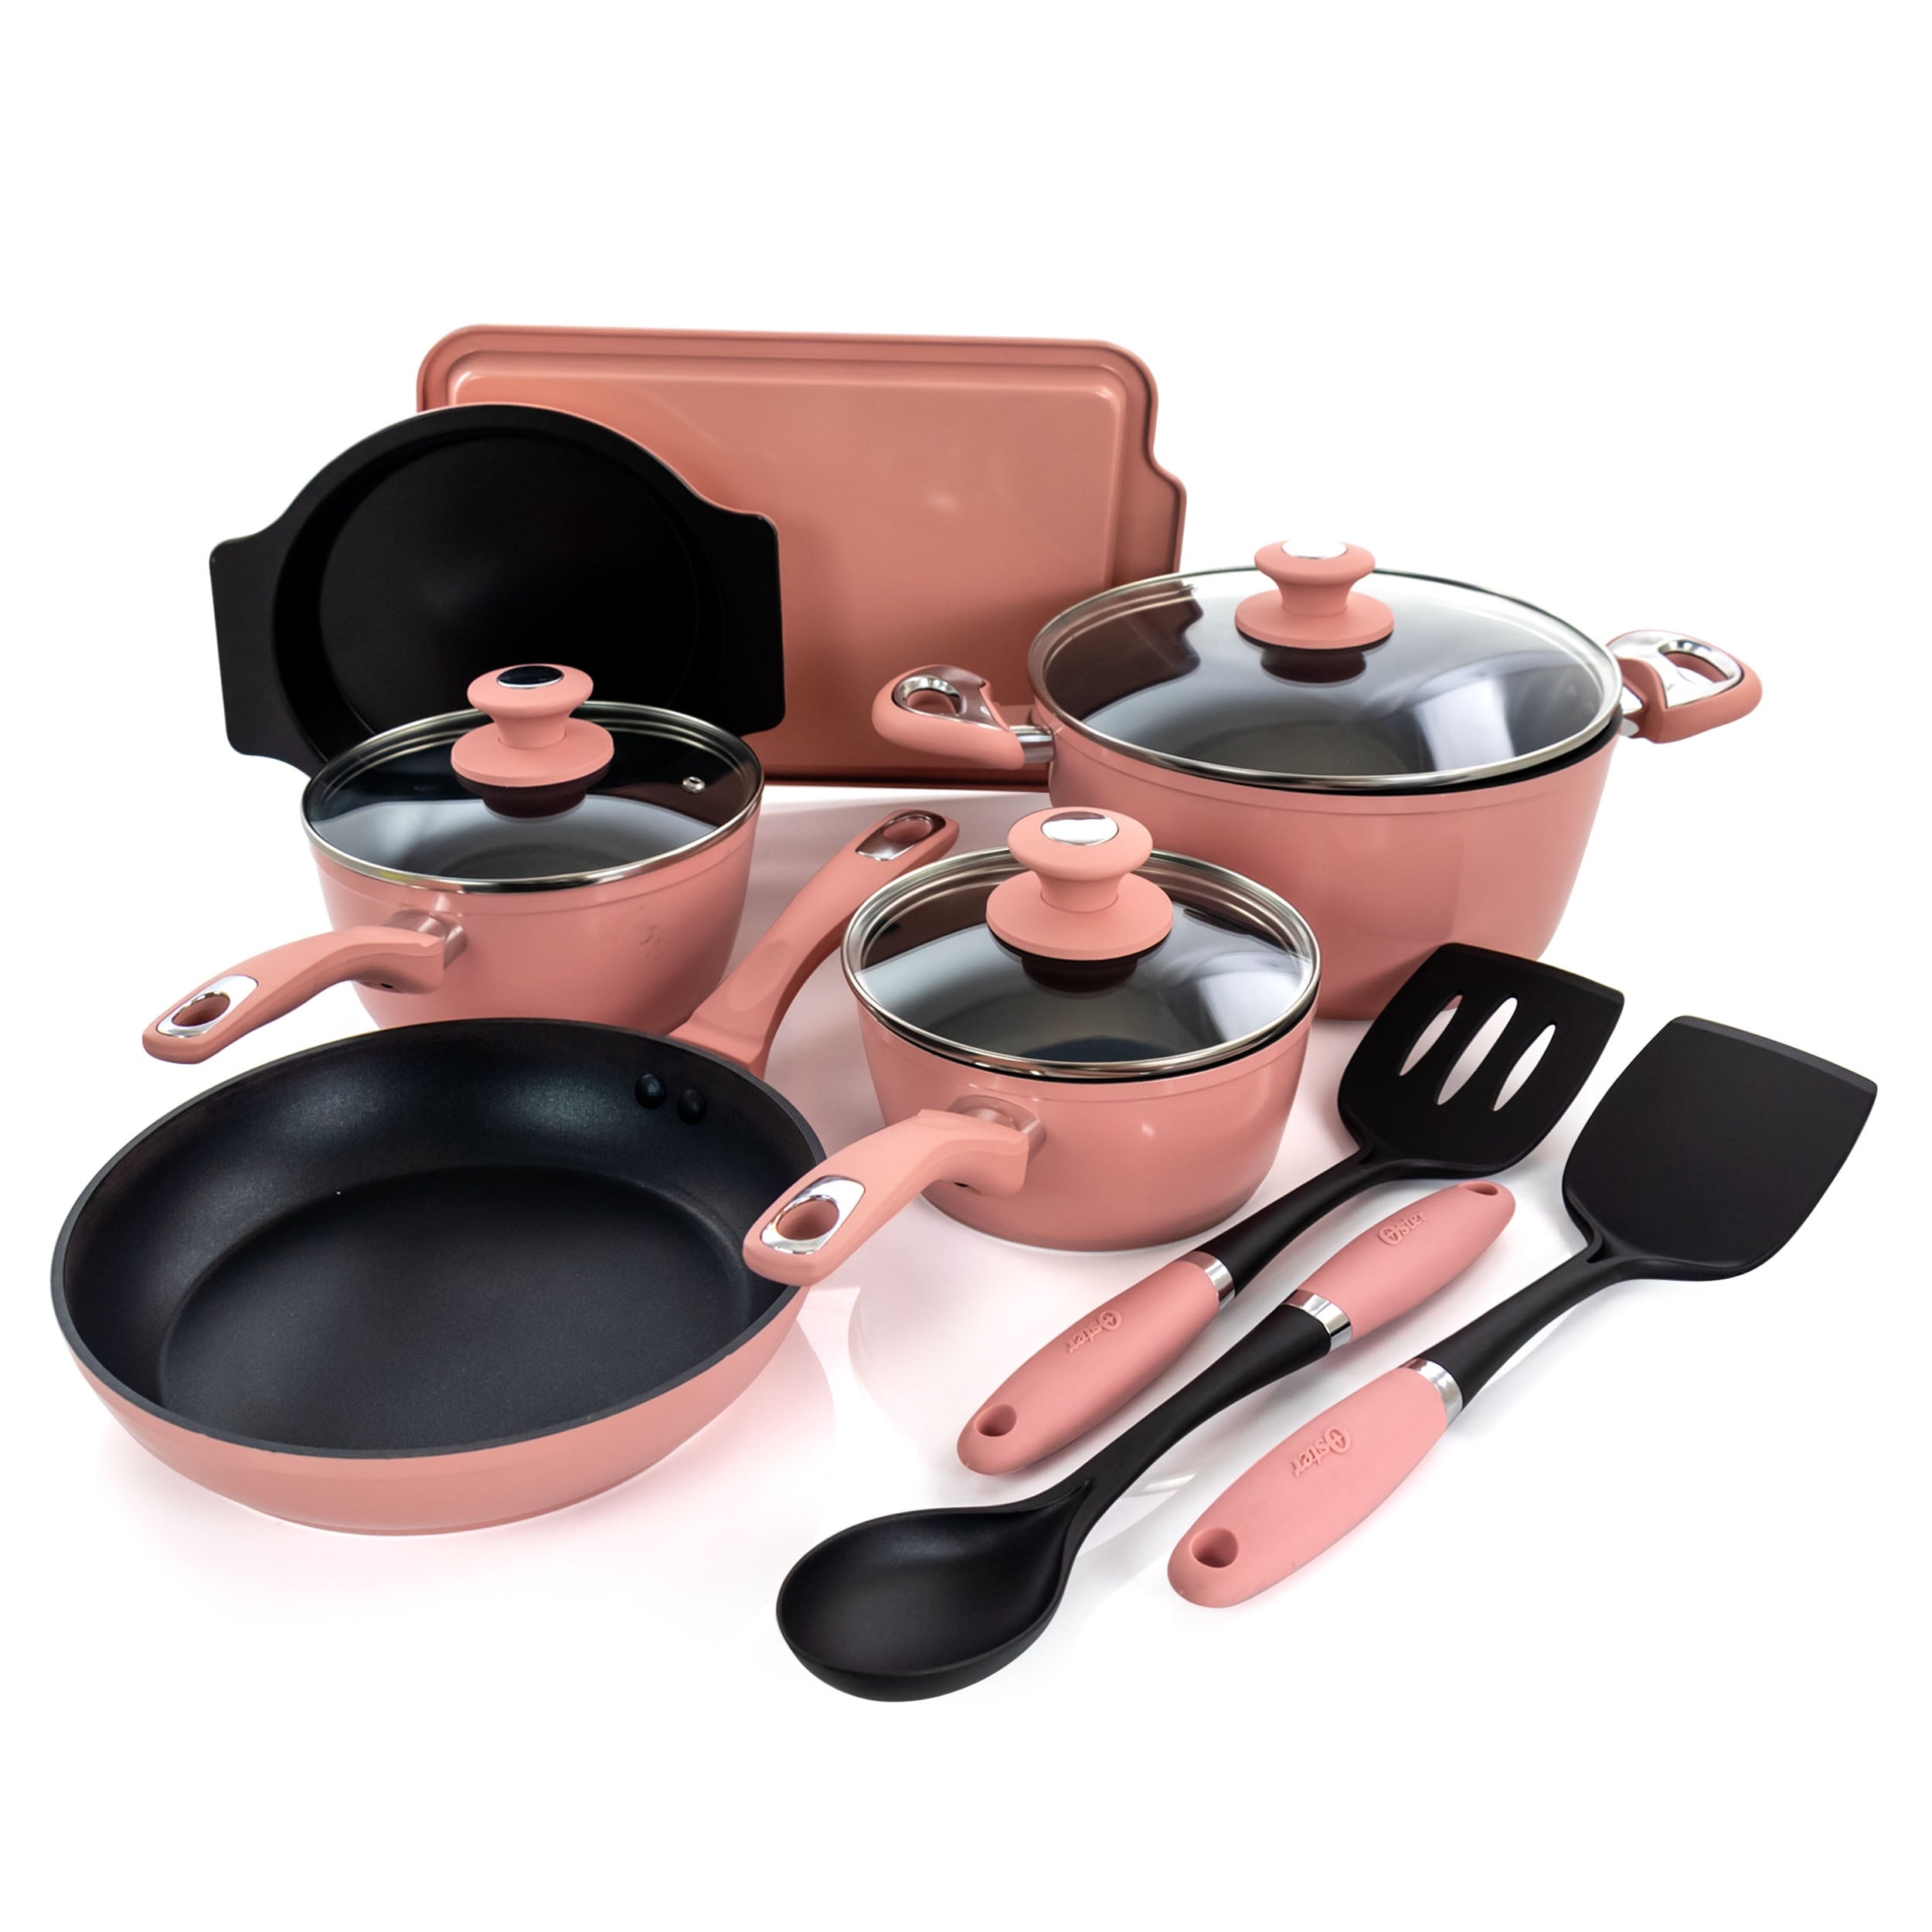 Bloomhouse - Oprah's Favorite Things - 12 Piece Aluminum Pots and Pans  Cookware Set w/Non-toxic Ceramic Non-stick, Ceramic Steamer Insert, & 12